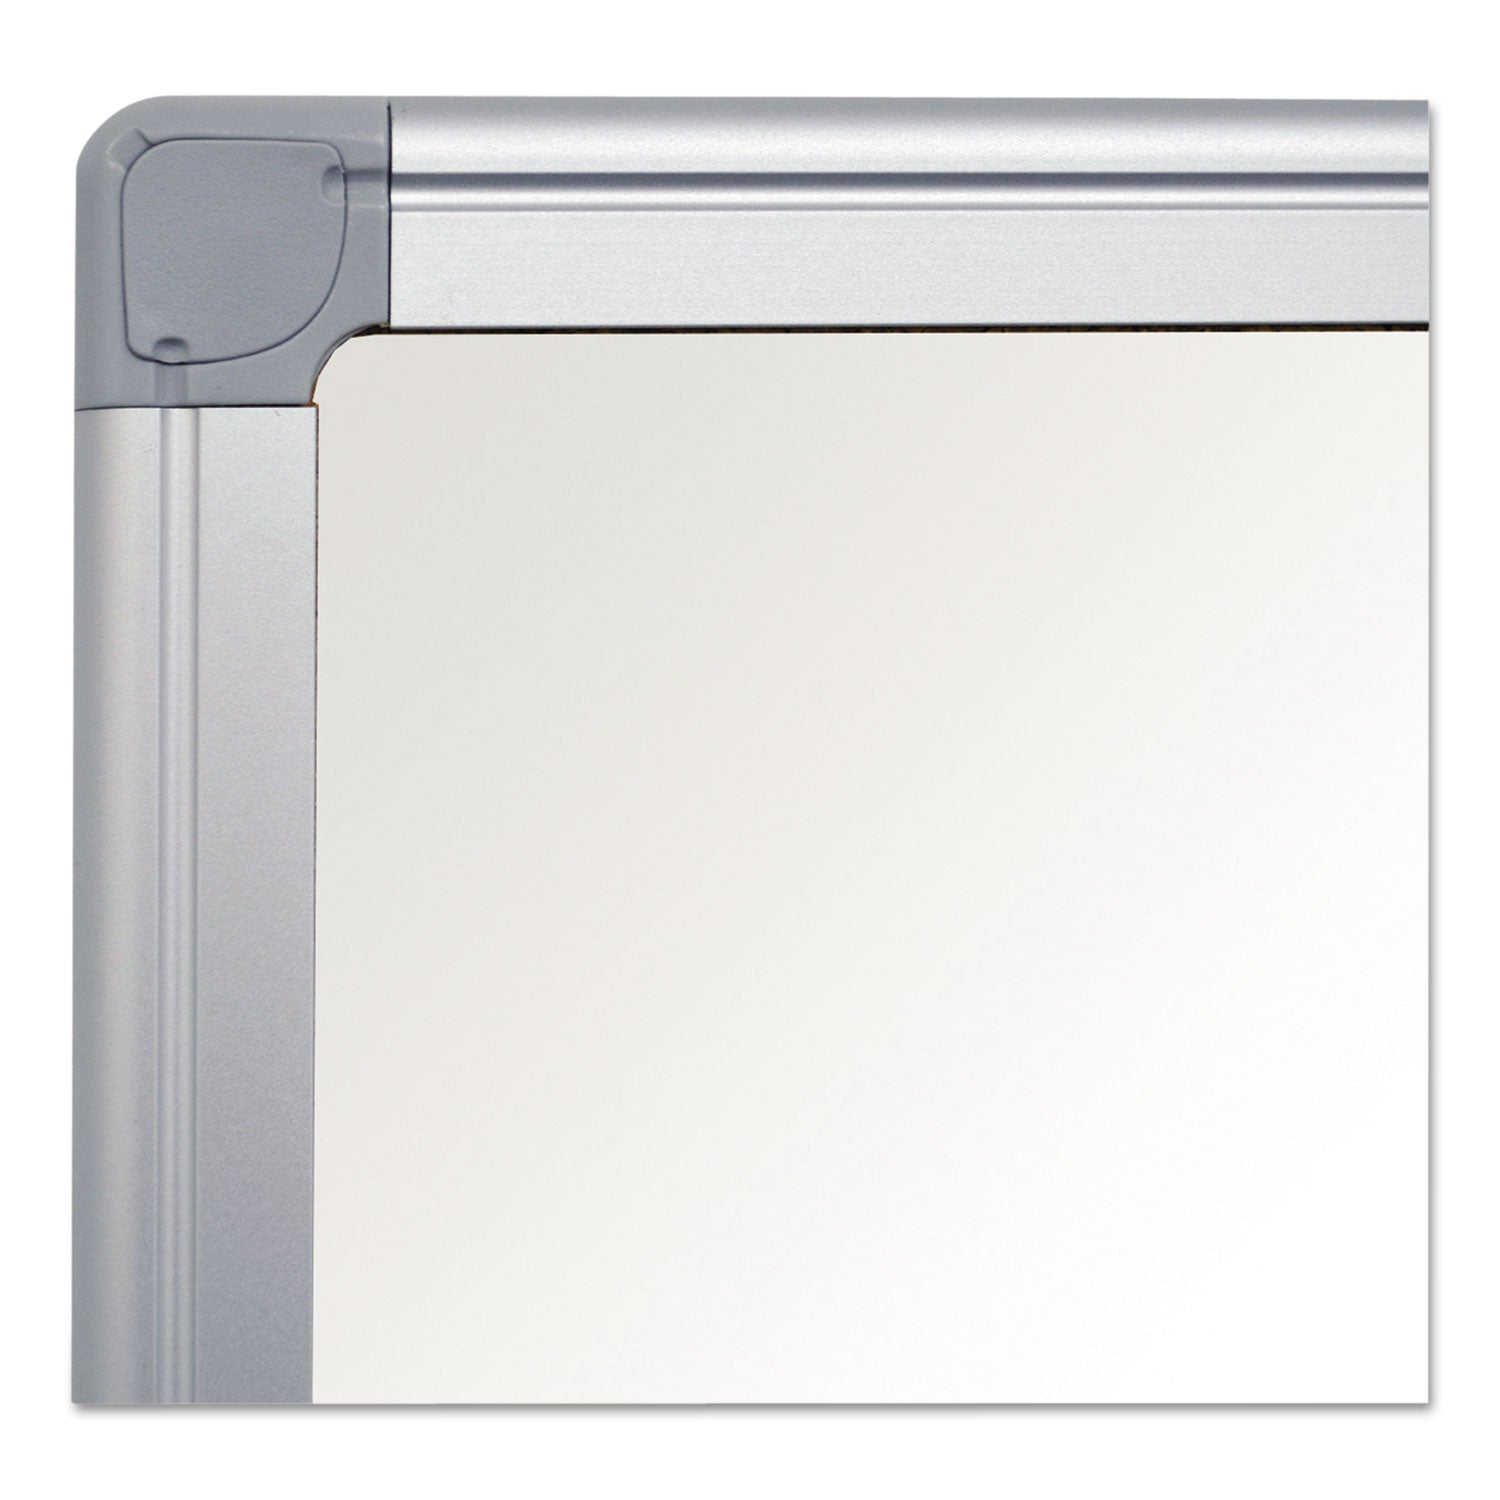 earth-silver-easy-clean-dry-erase-board-72-x-48-white-surface-silver-aluminum-frame_bvccr1220790 - 3